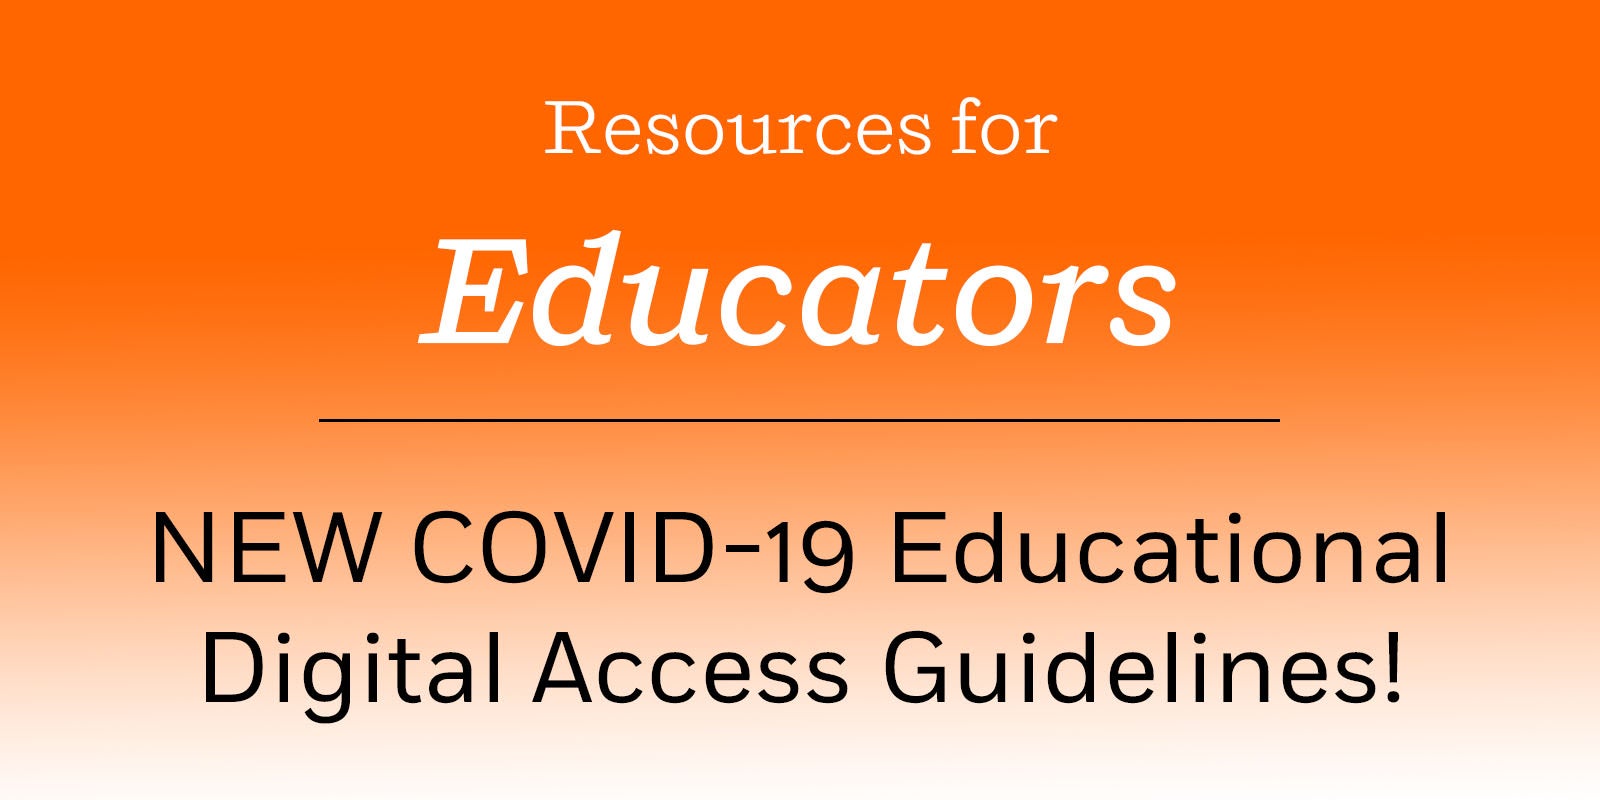 NEW COVID-19 Educational Digital Access Guidelines!